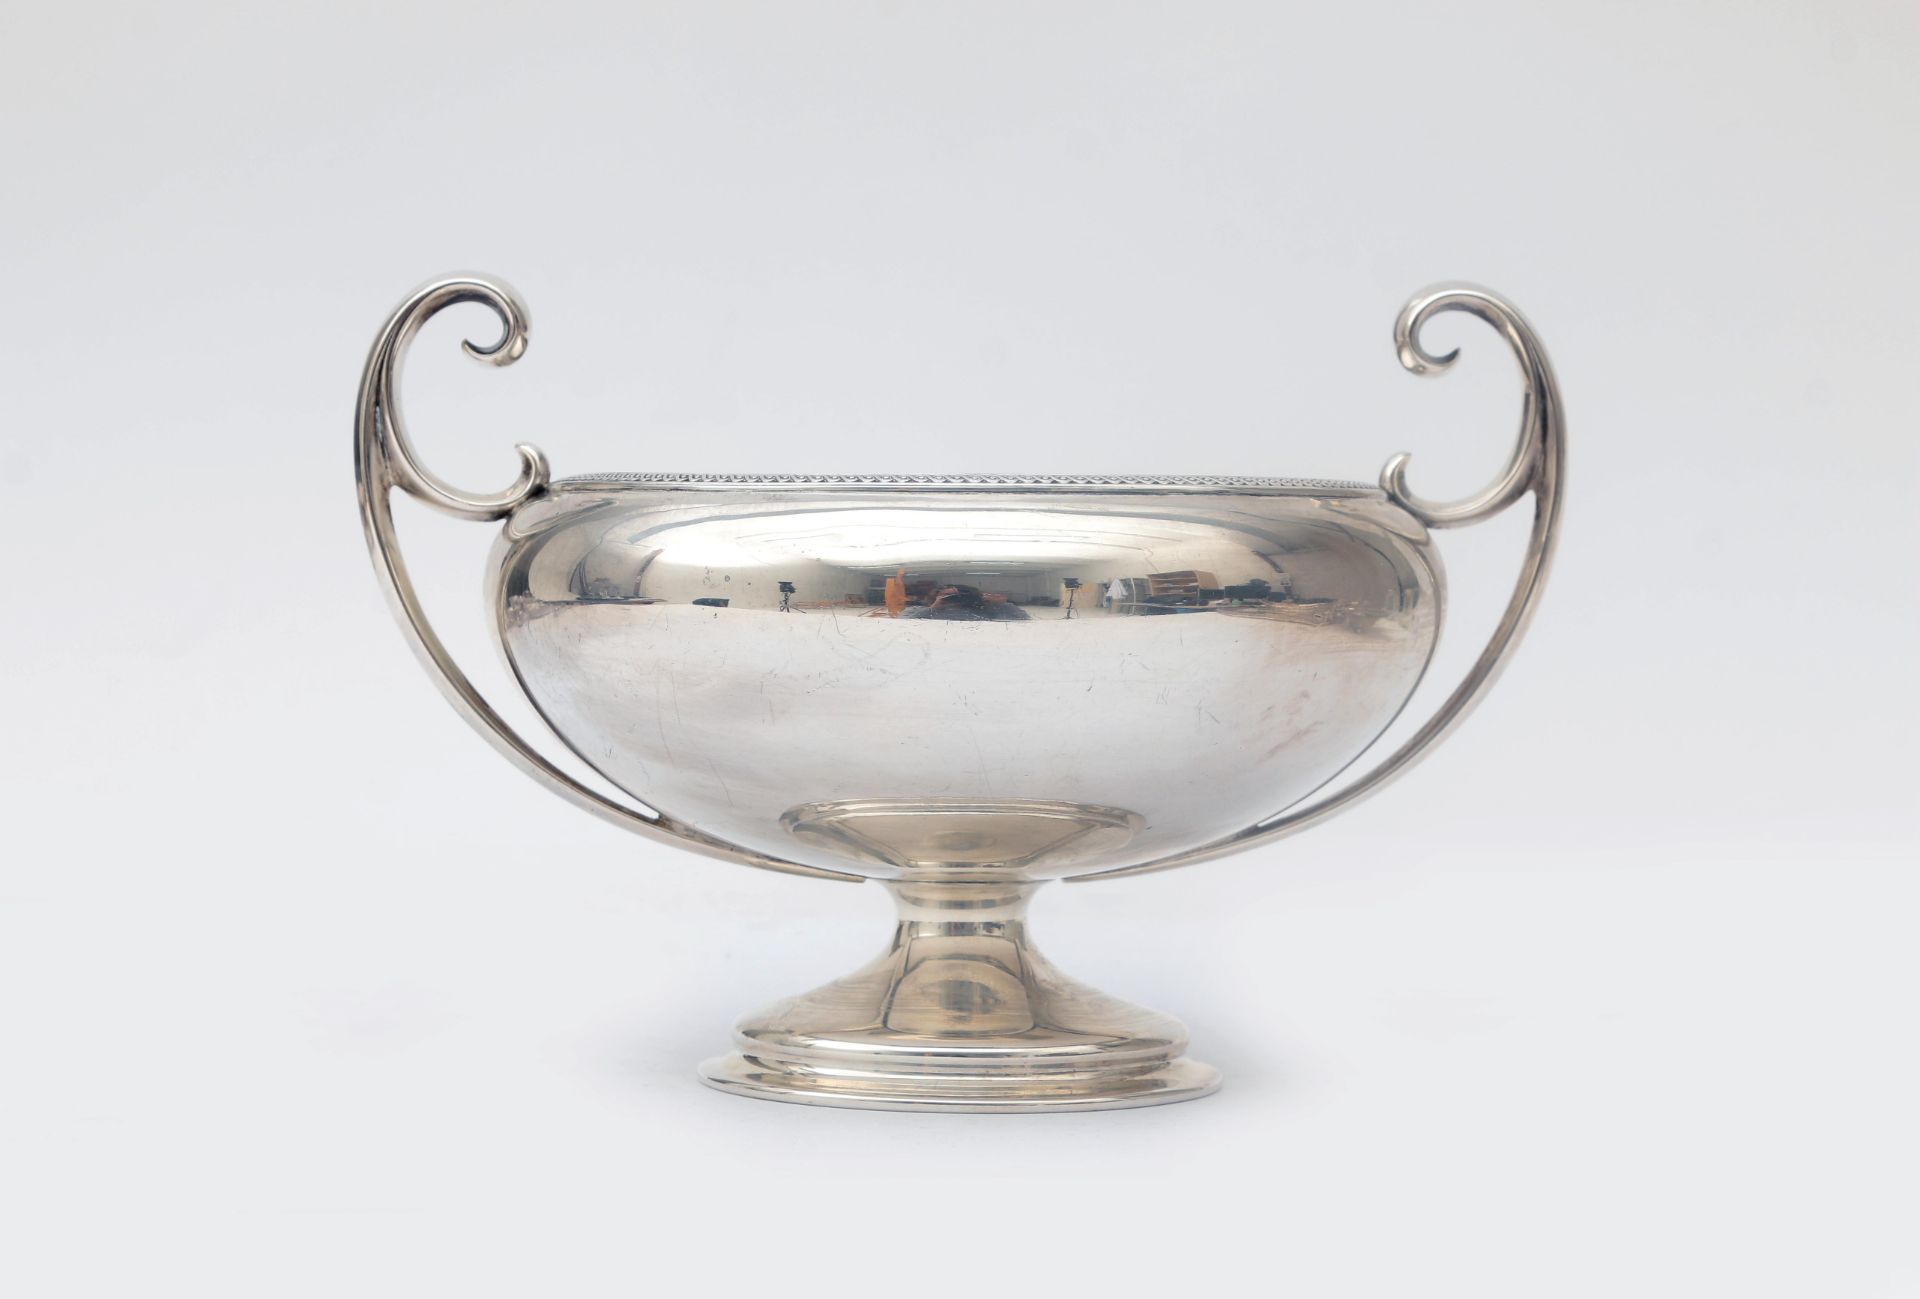 A sterling silver cream bowl on a foot, a round wide-flaring bowl with two high, upright curling